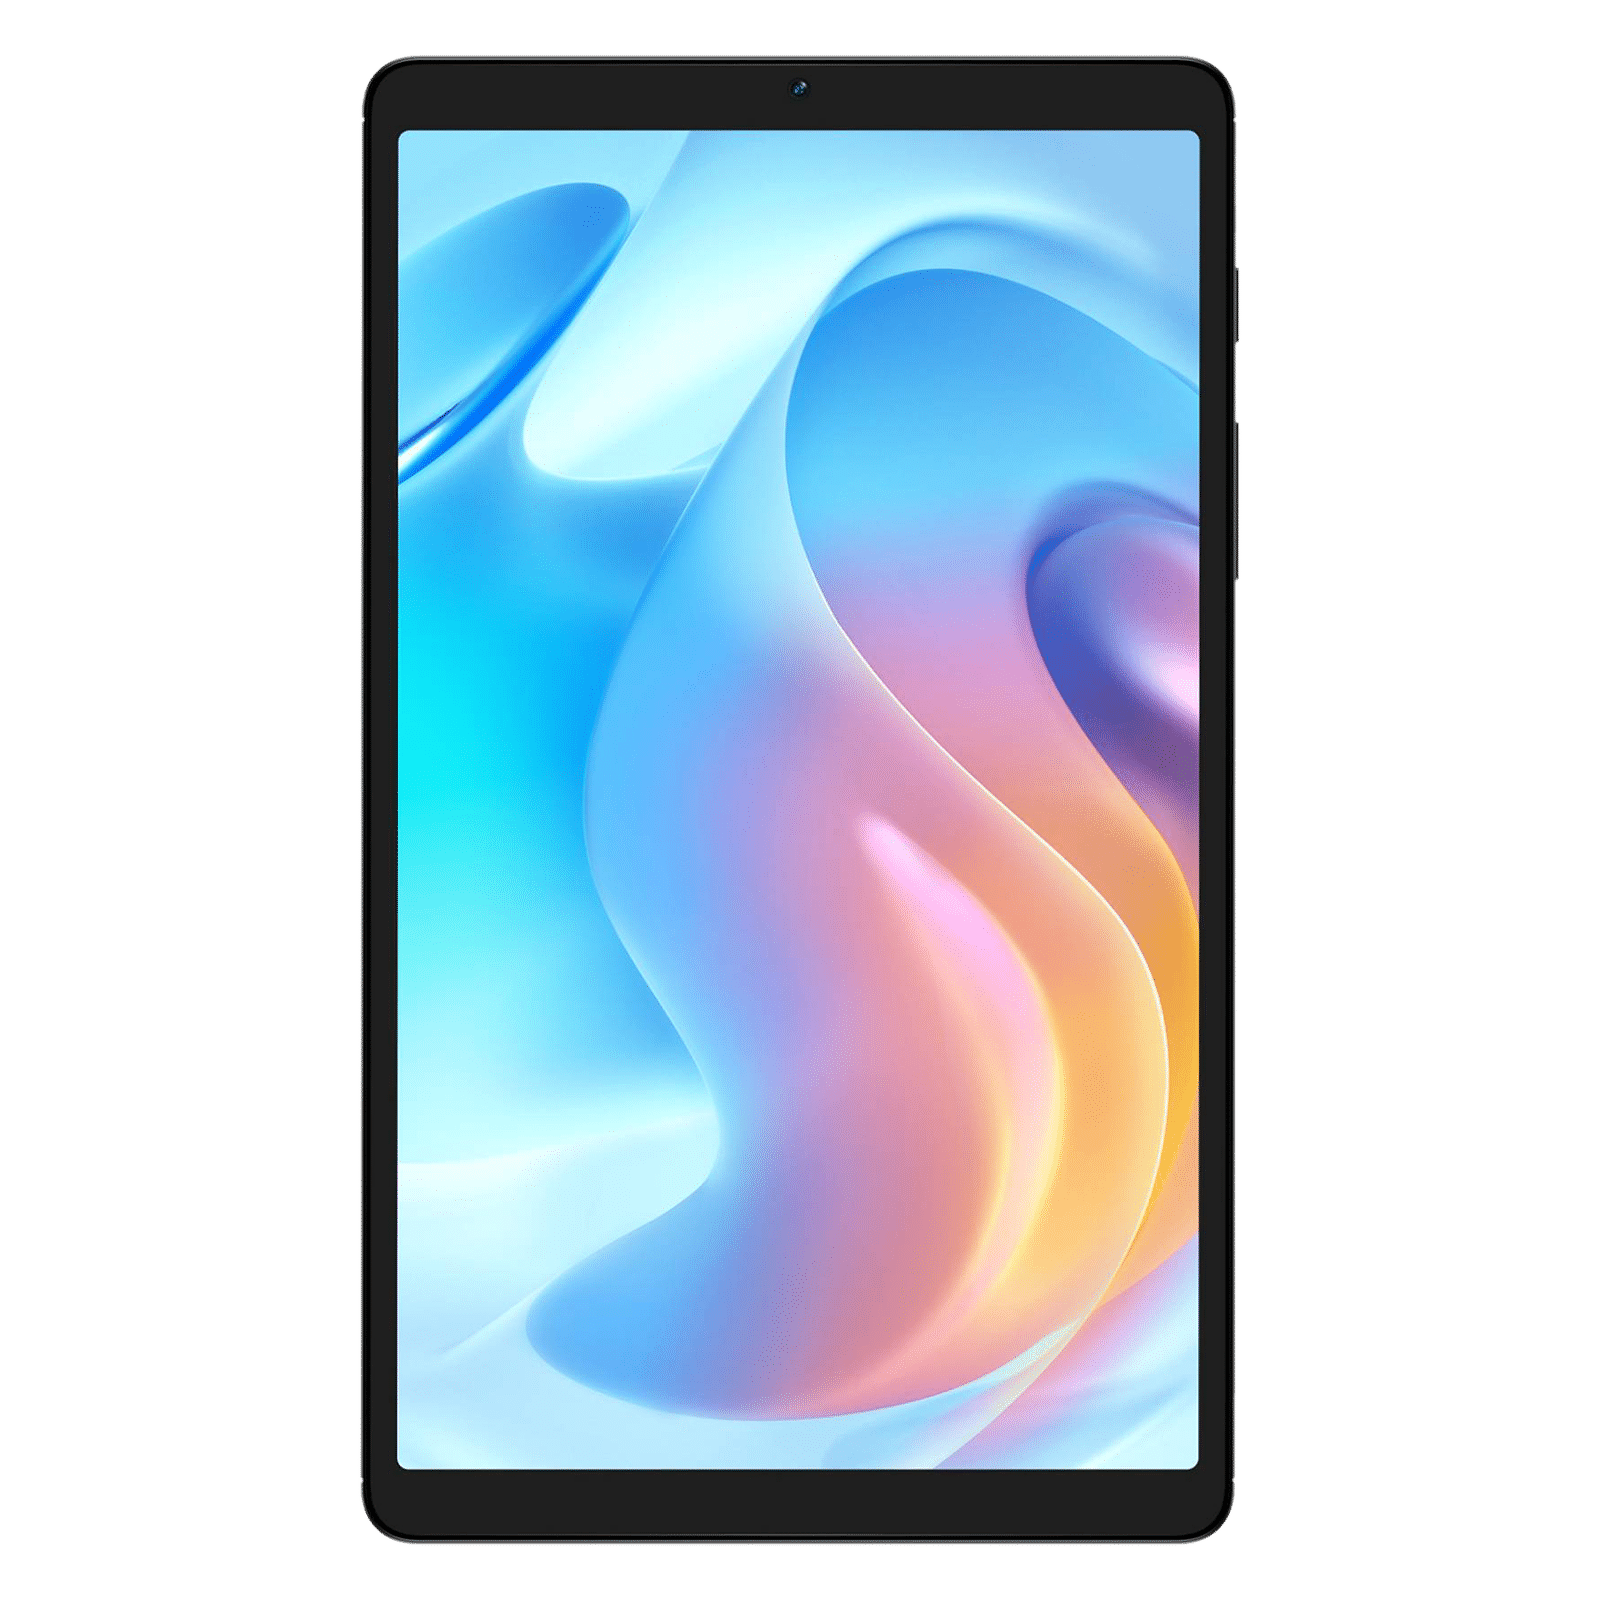 Wi-Fi+4G) Realme Pad LTE GREY 4GB+64GB Octa Core Global Ver. Android PC  Tablet